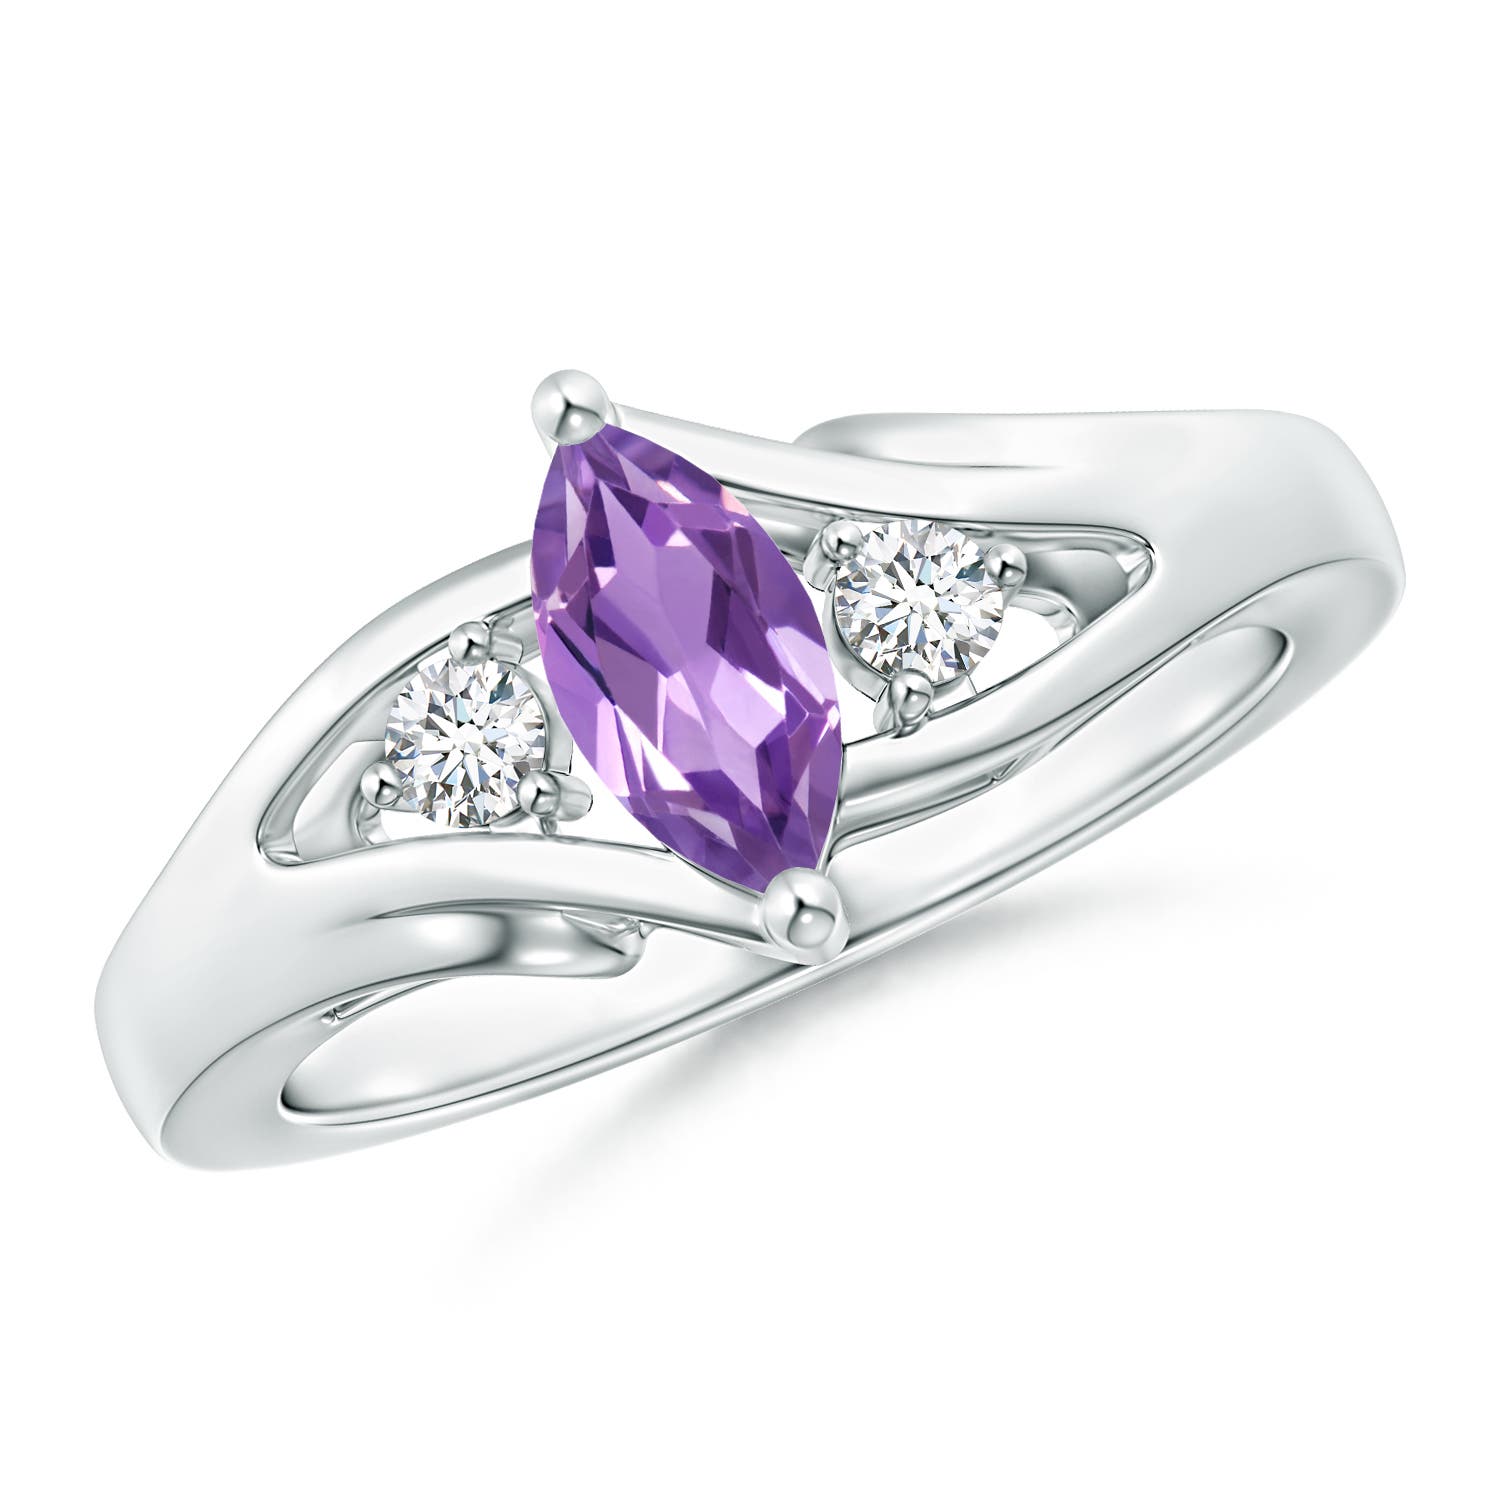 A - Amethyst / 0.64 CT / 14 KT White Gold